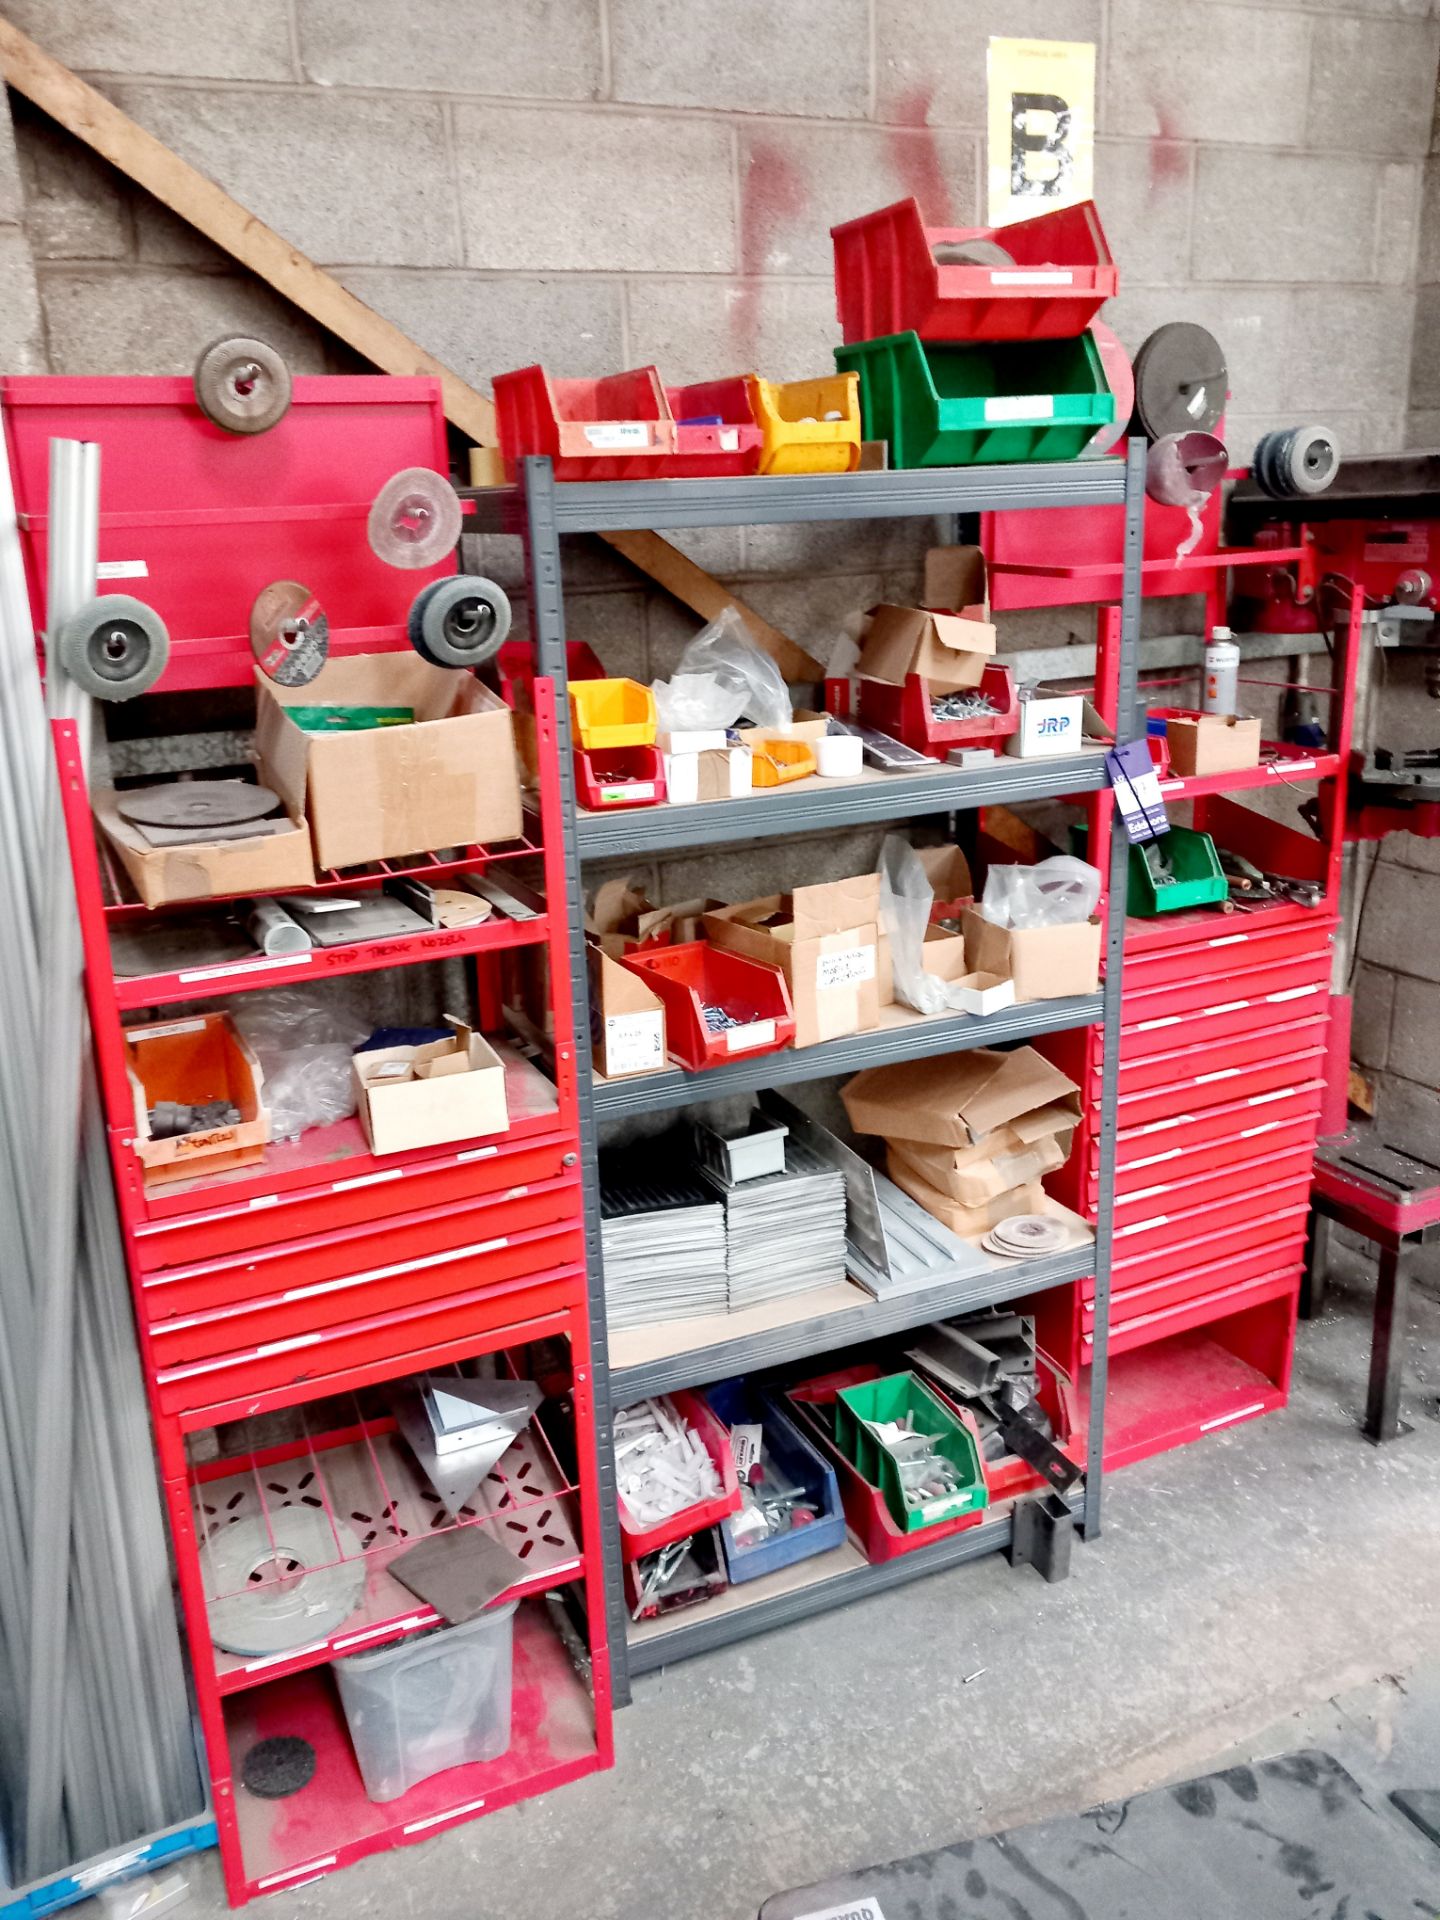 4 x Shelving units and contents of consumables, grinding discs, fittings etc.